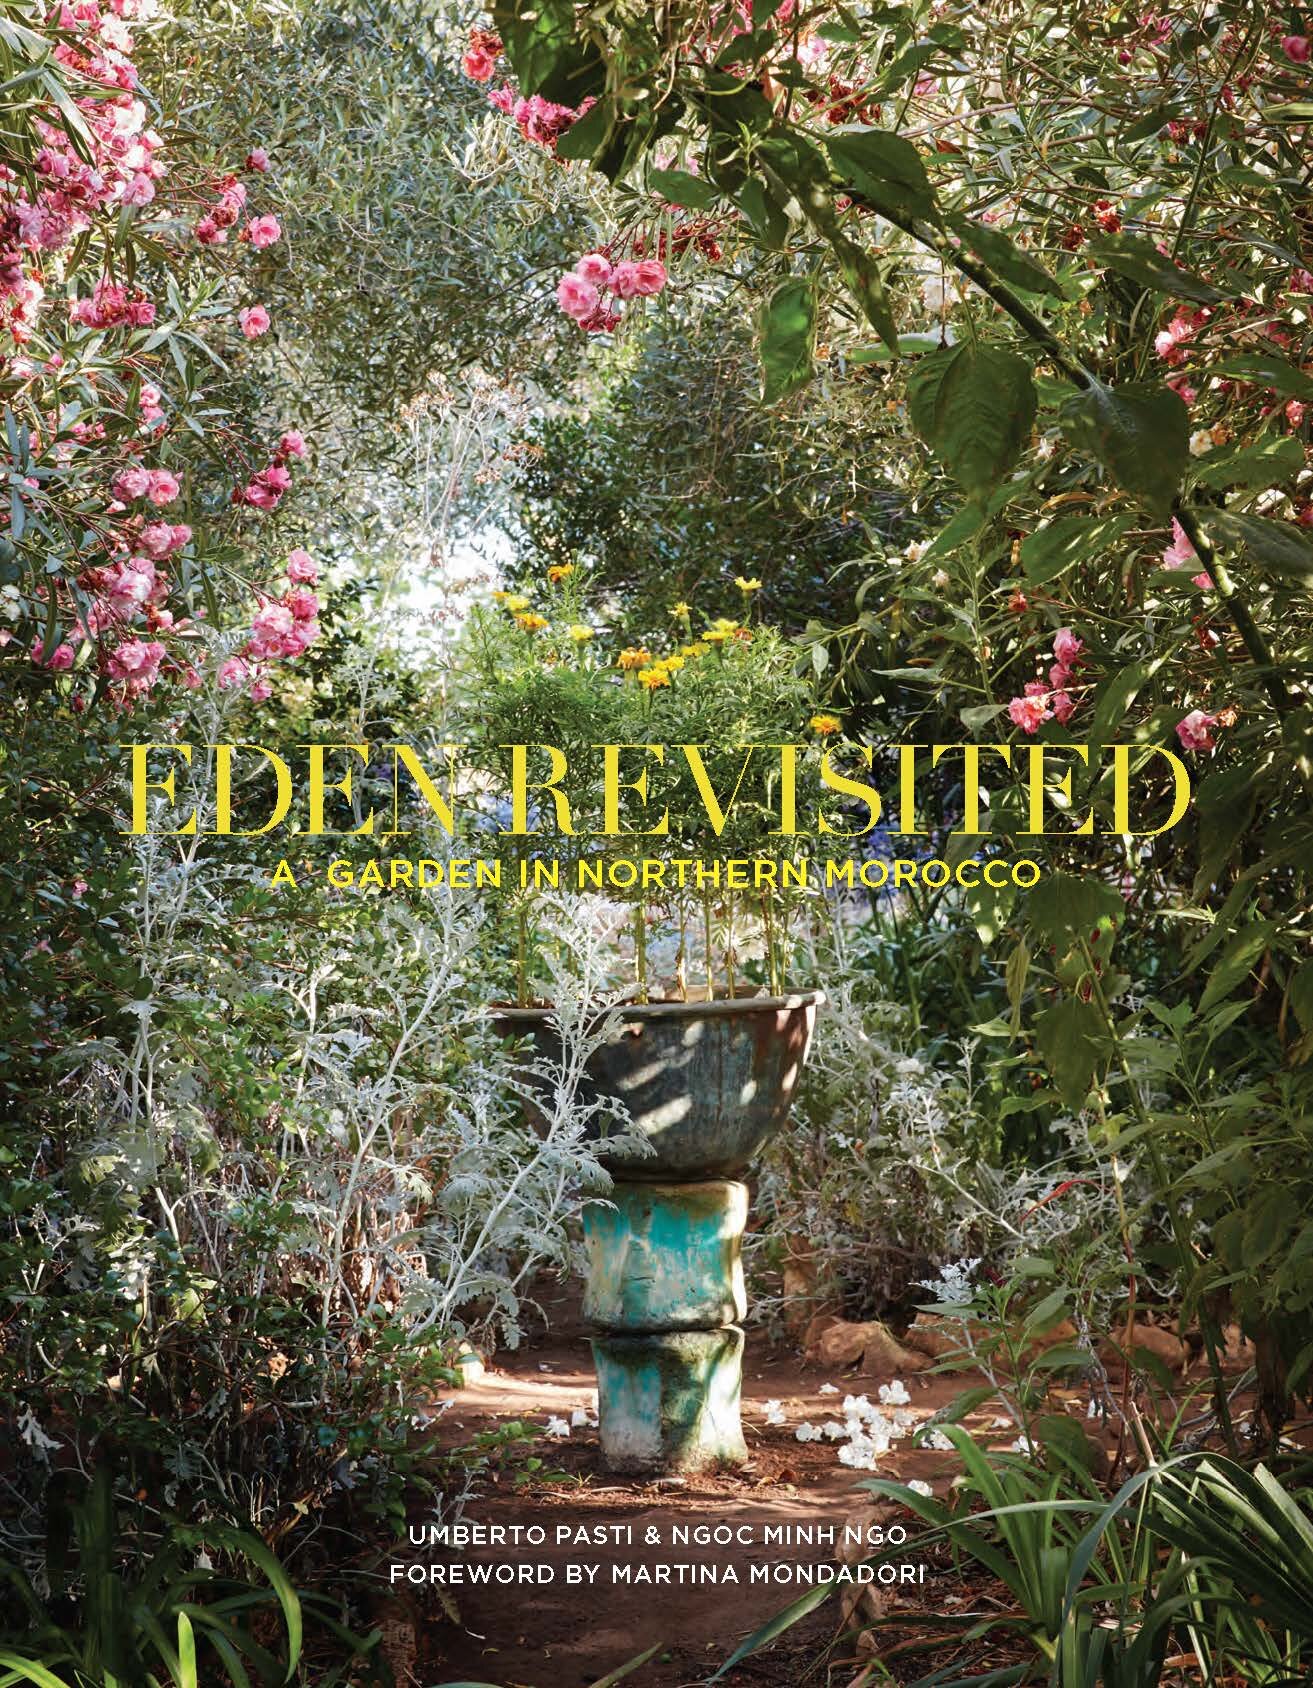 Eden Revisited: A Garden in Northern Morocco, published by Rizzoli